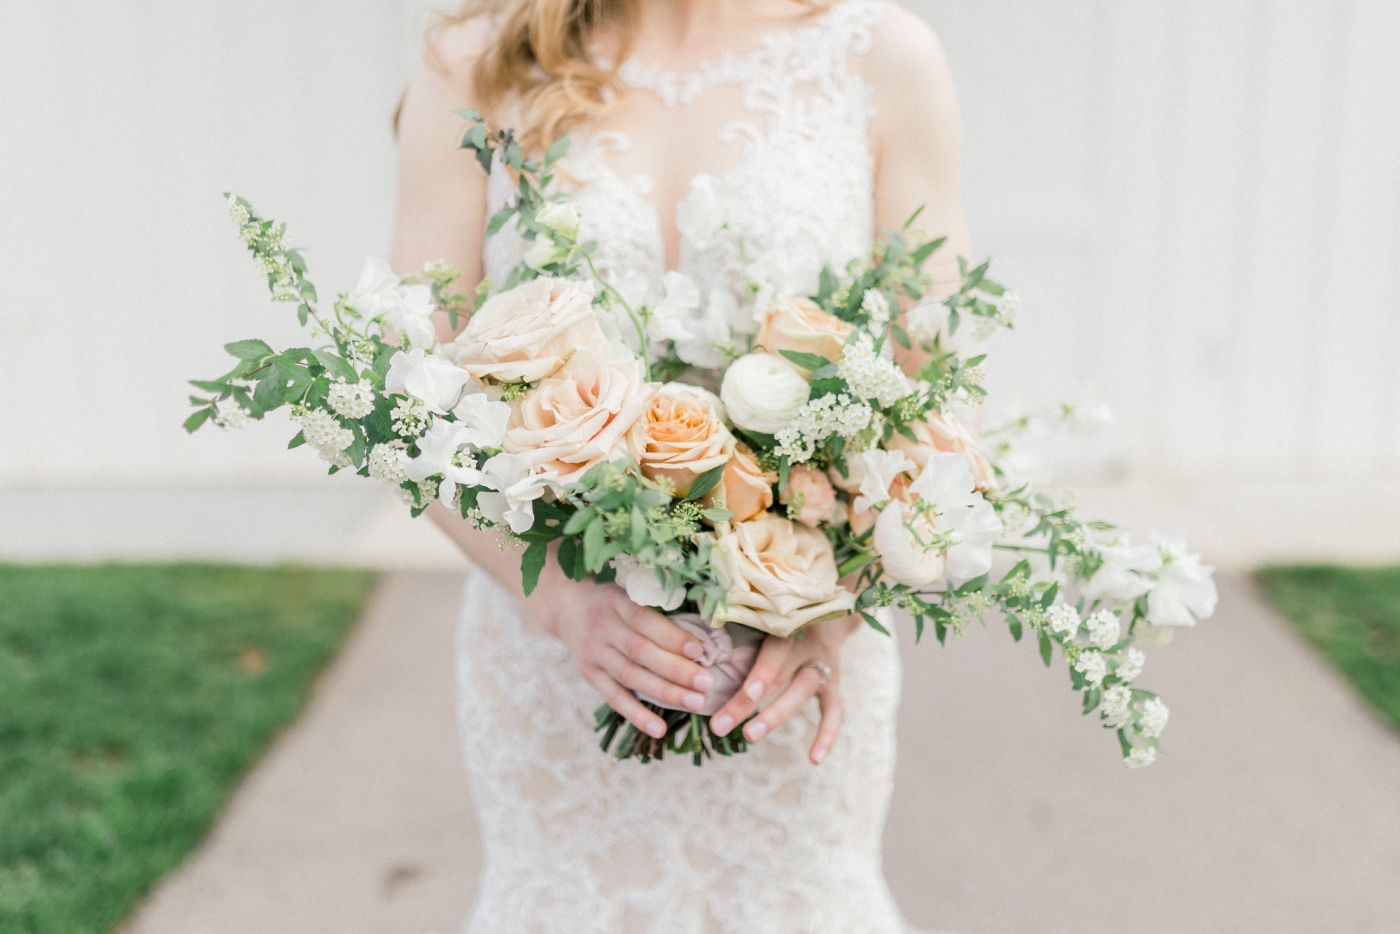 Blush and cream bridal bouquet by Penelope and Lu